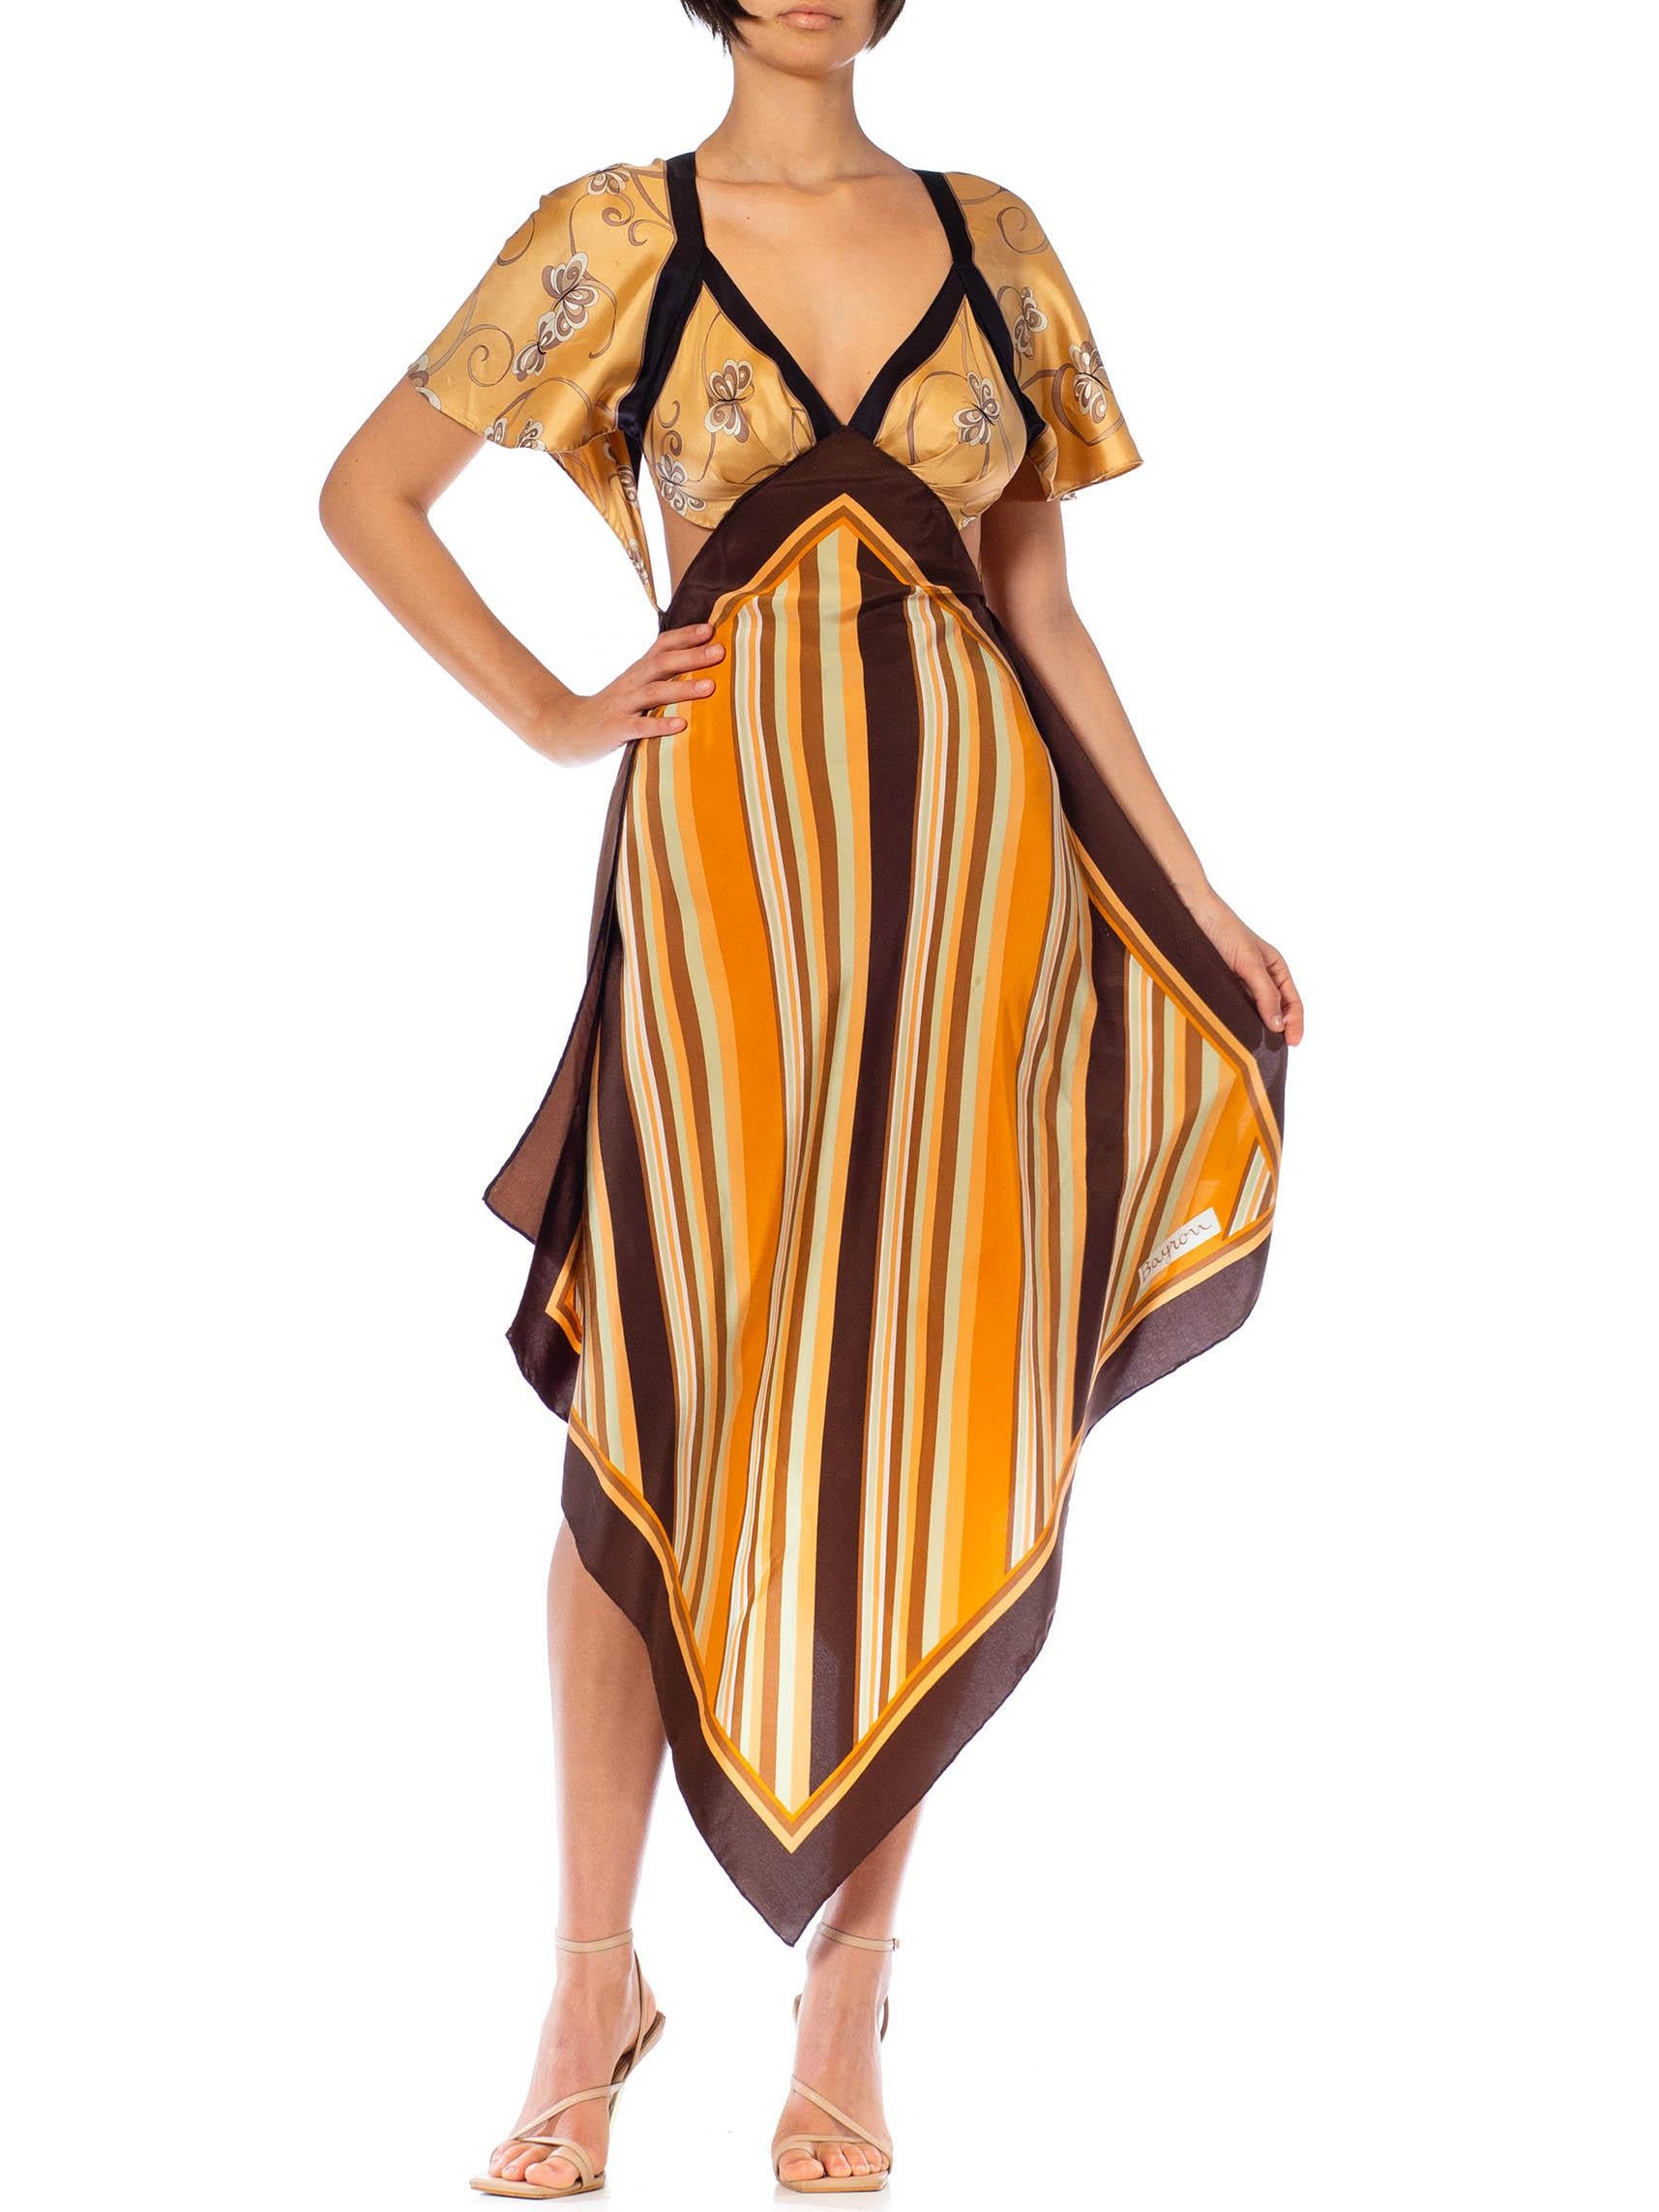 MORPHEW COLLECTION Brown, Orange & Cream Silk Stripe Butterfly 3-Scarf Dress Ma For Sale 4